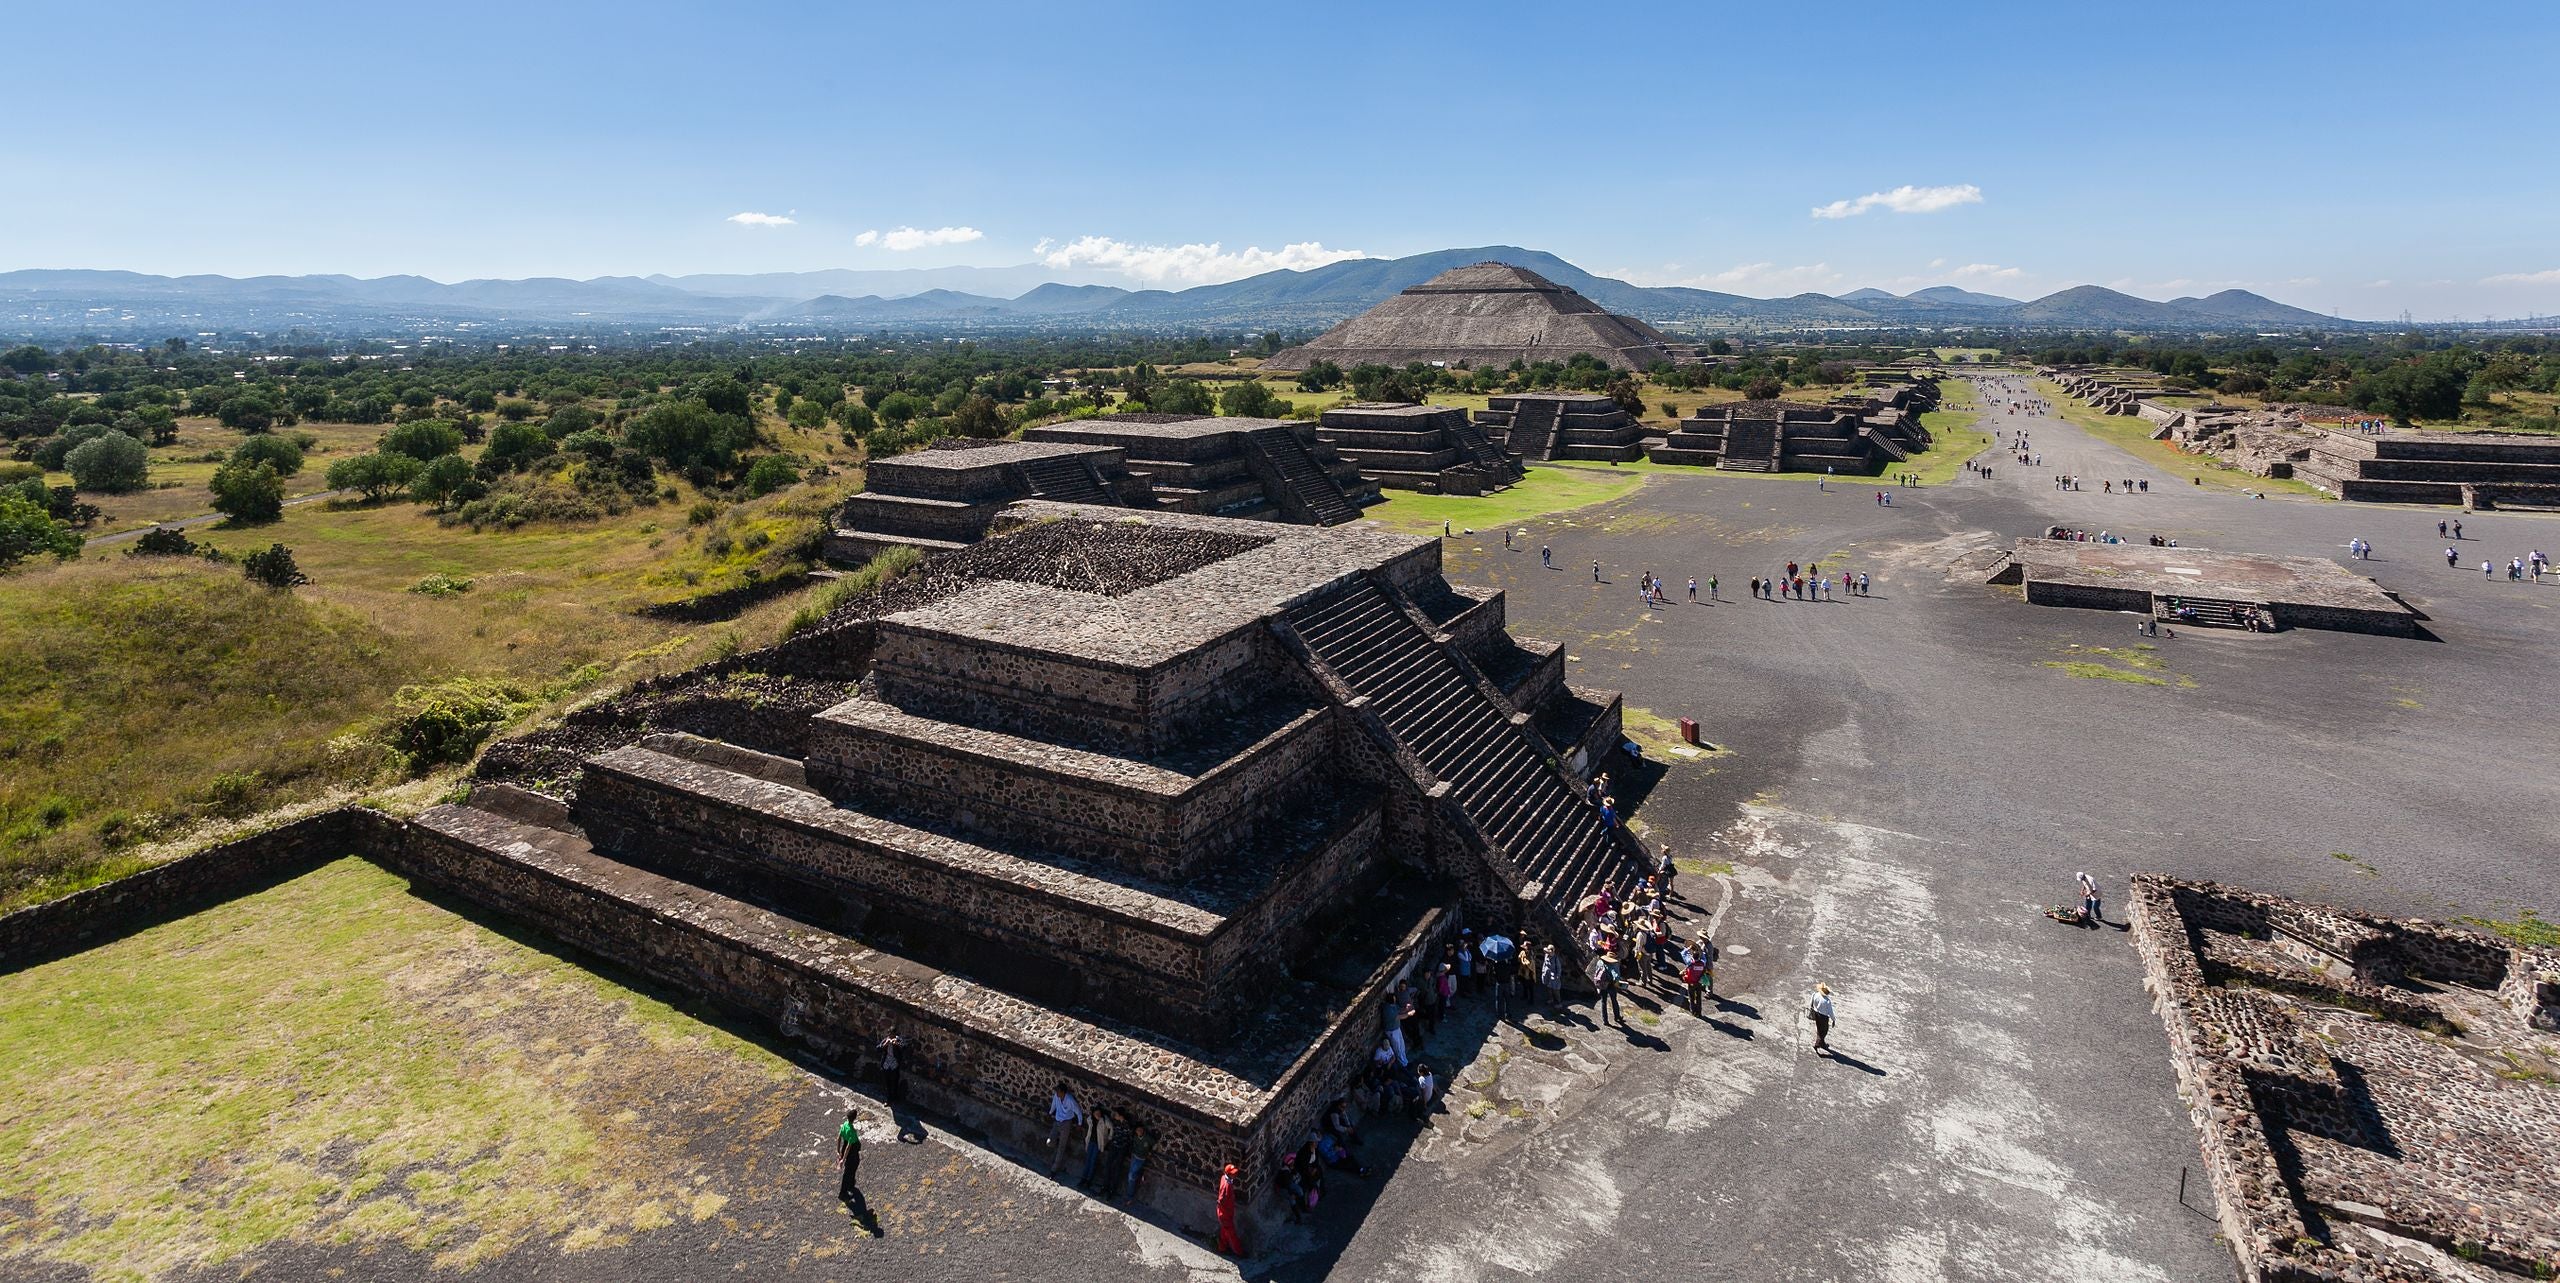 Avenue of the Dead, Teotihuacán, Mexico. (Image: Diego Delso, Fair Use)